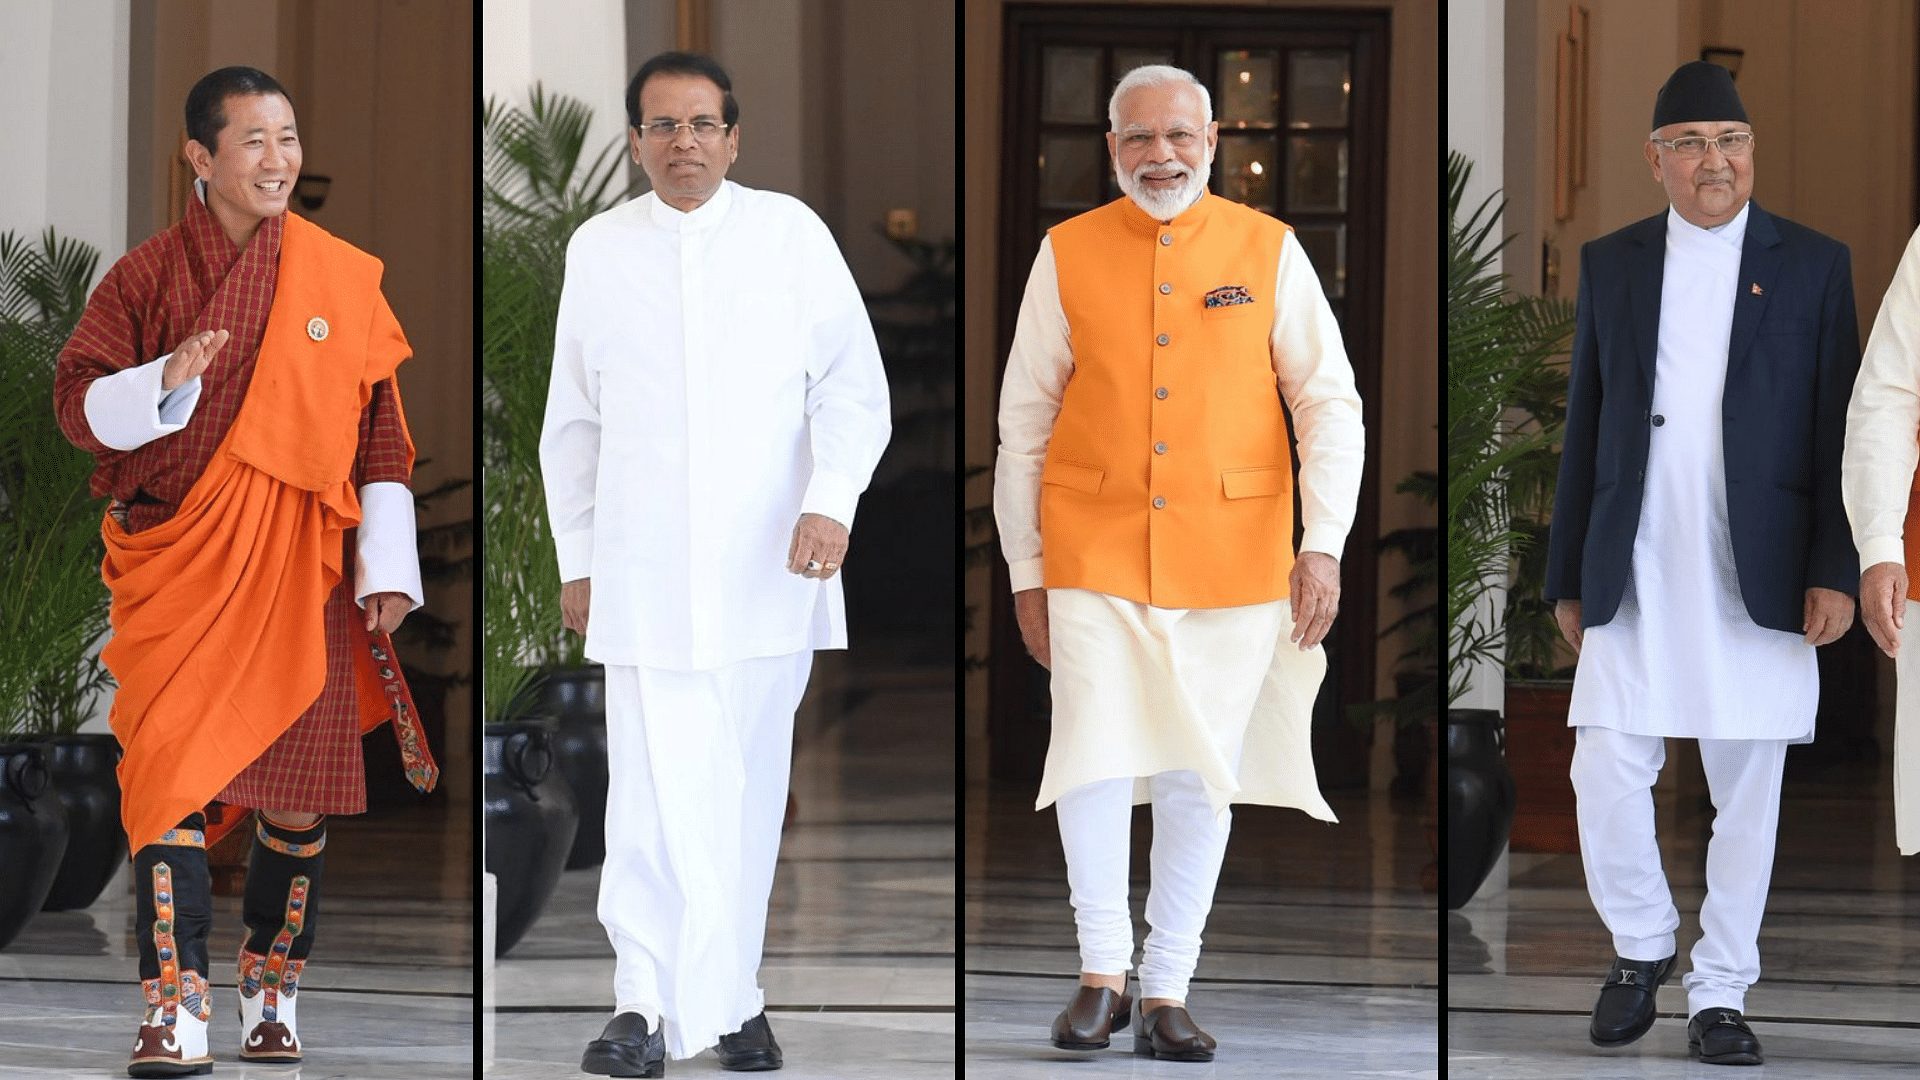 The foreign leaders came to India to attend Modi’s swearing-in ceremony.